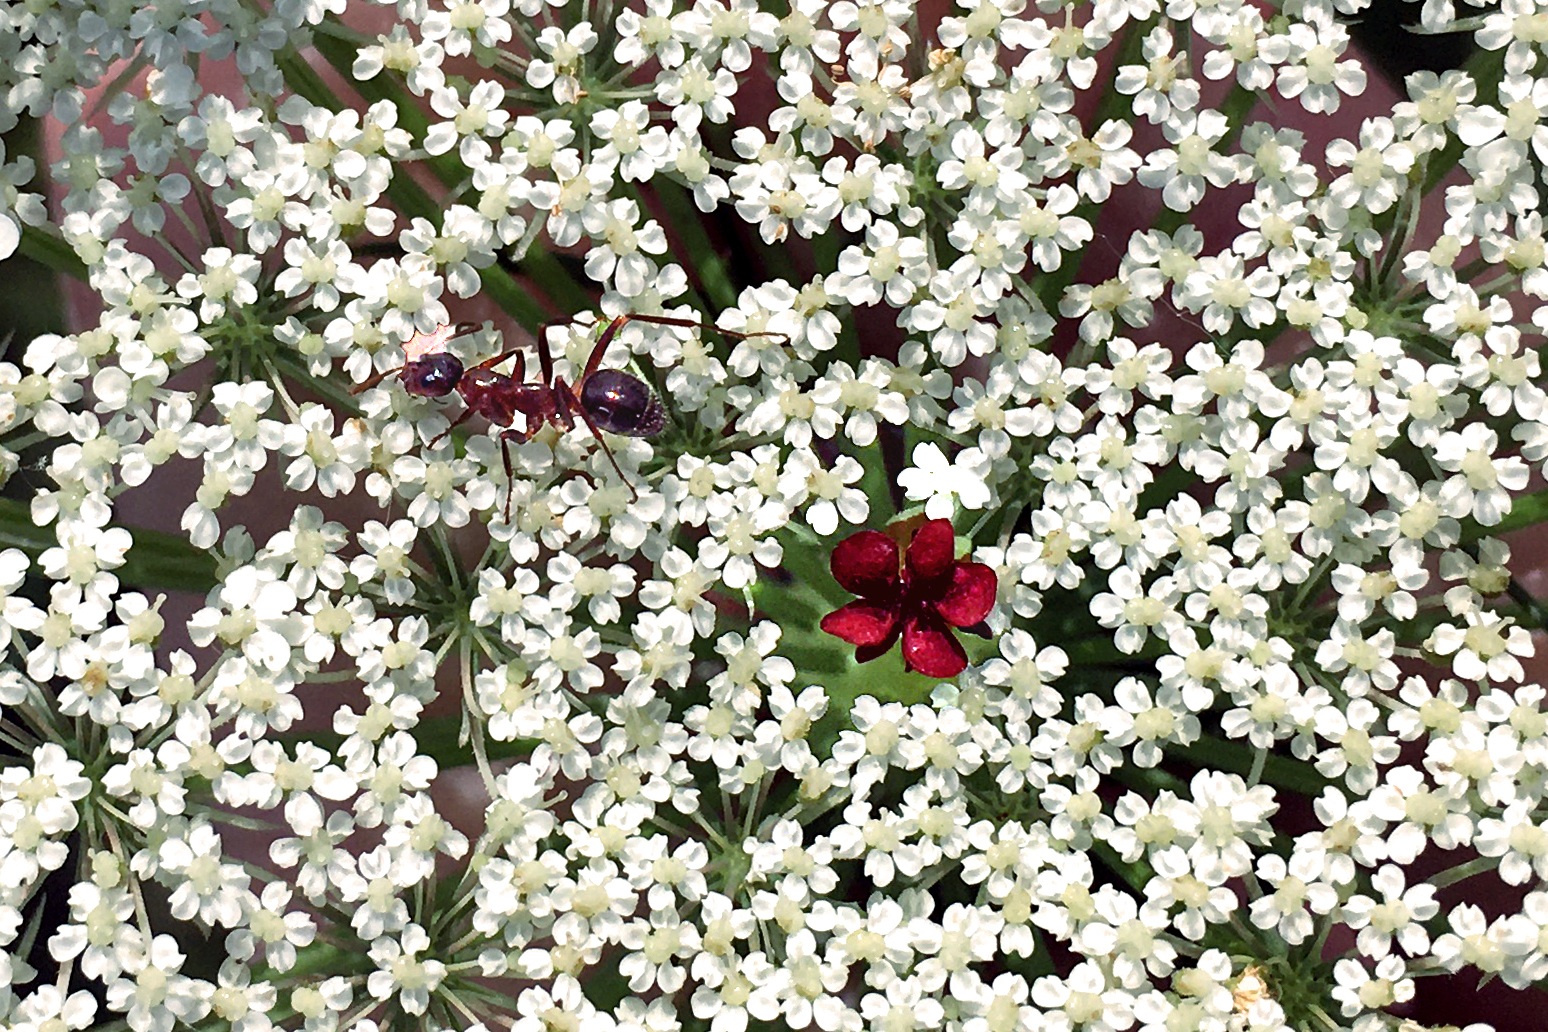 An Ant Rests in a Queen Anne’s Lace Bed